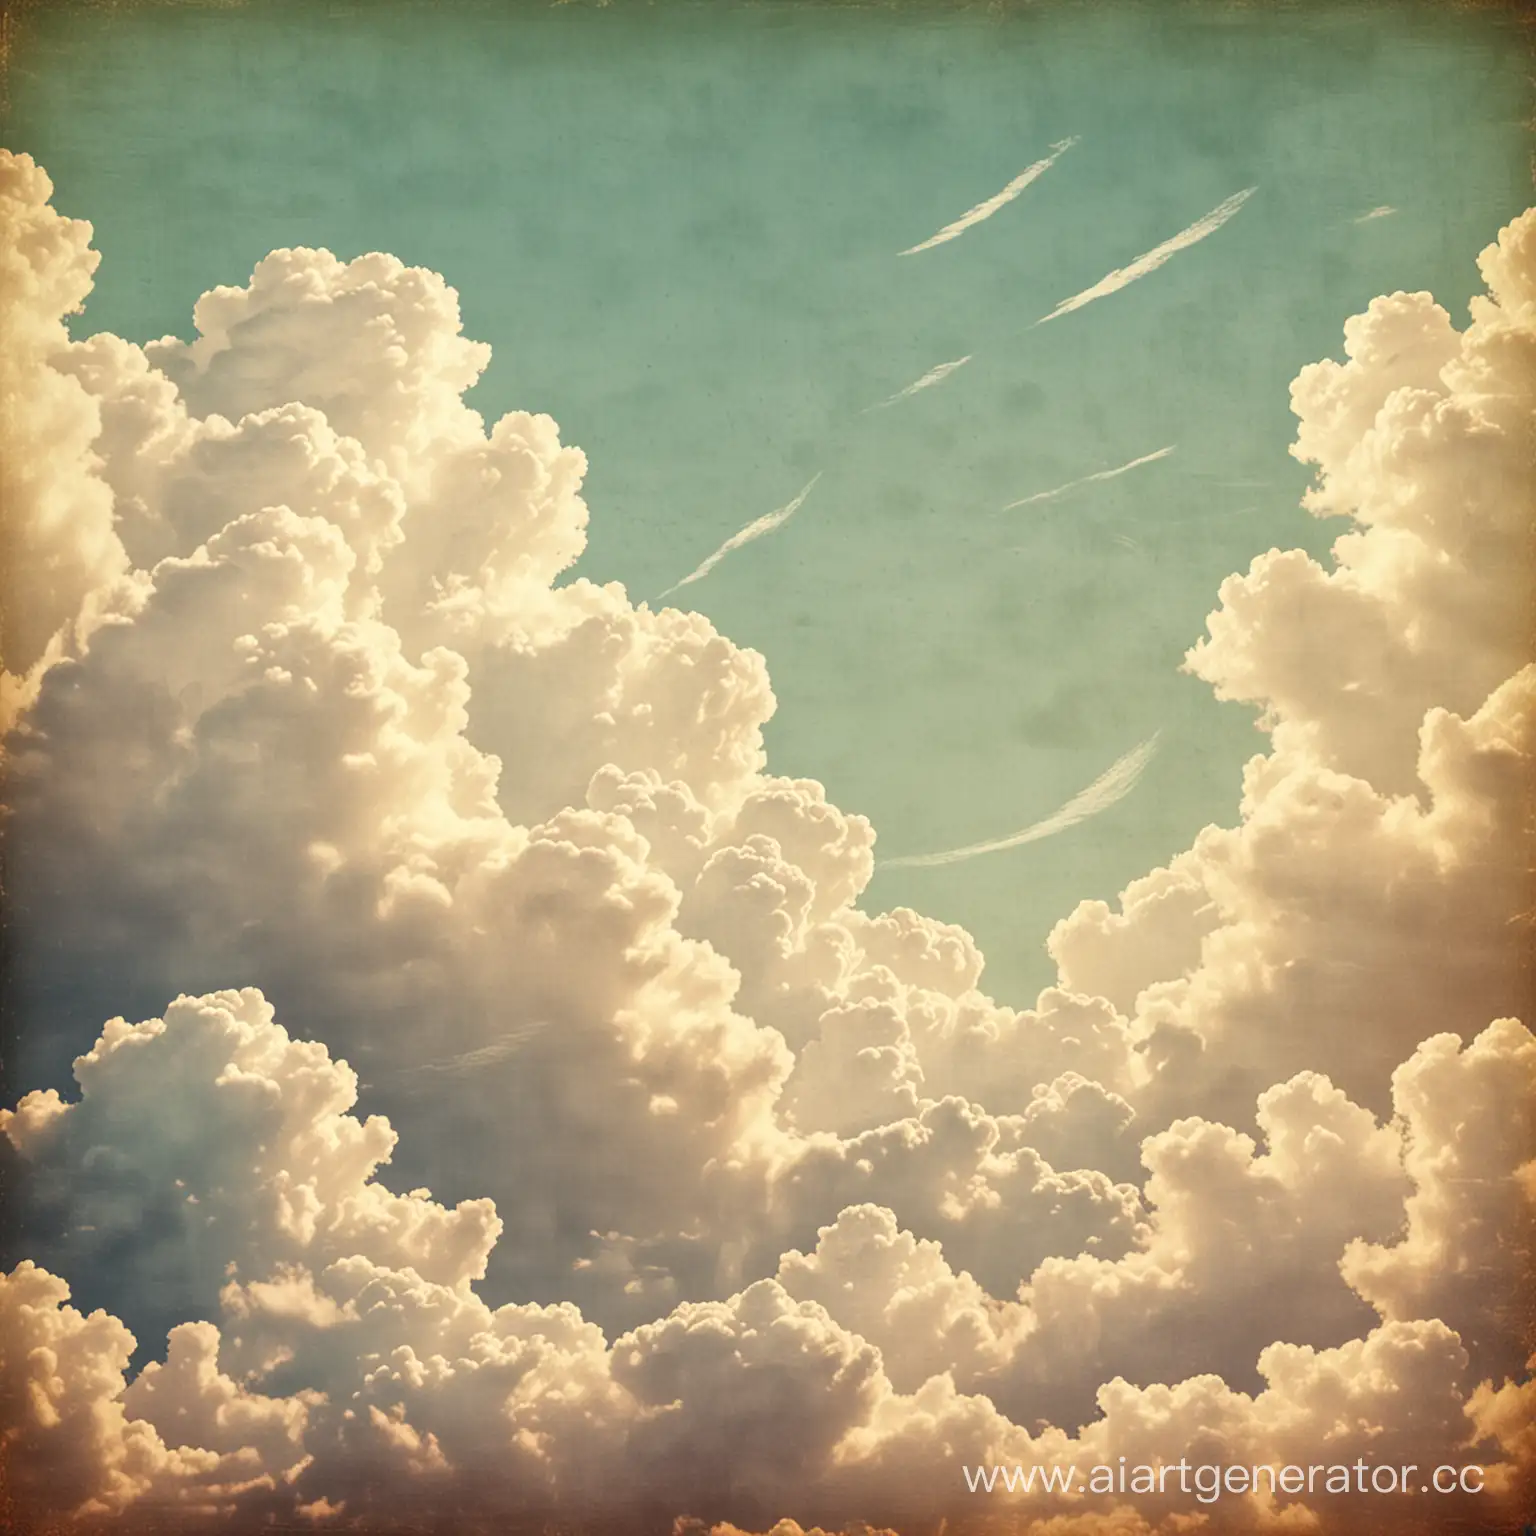 cover for music album with clouds in vintage style